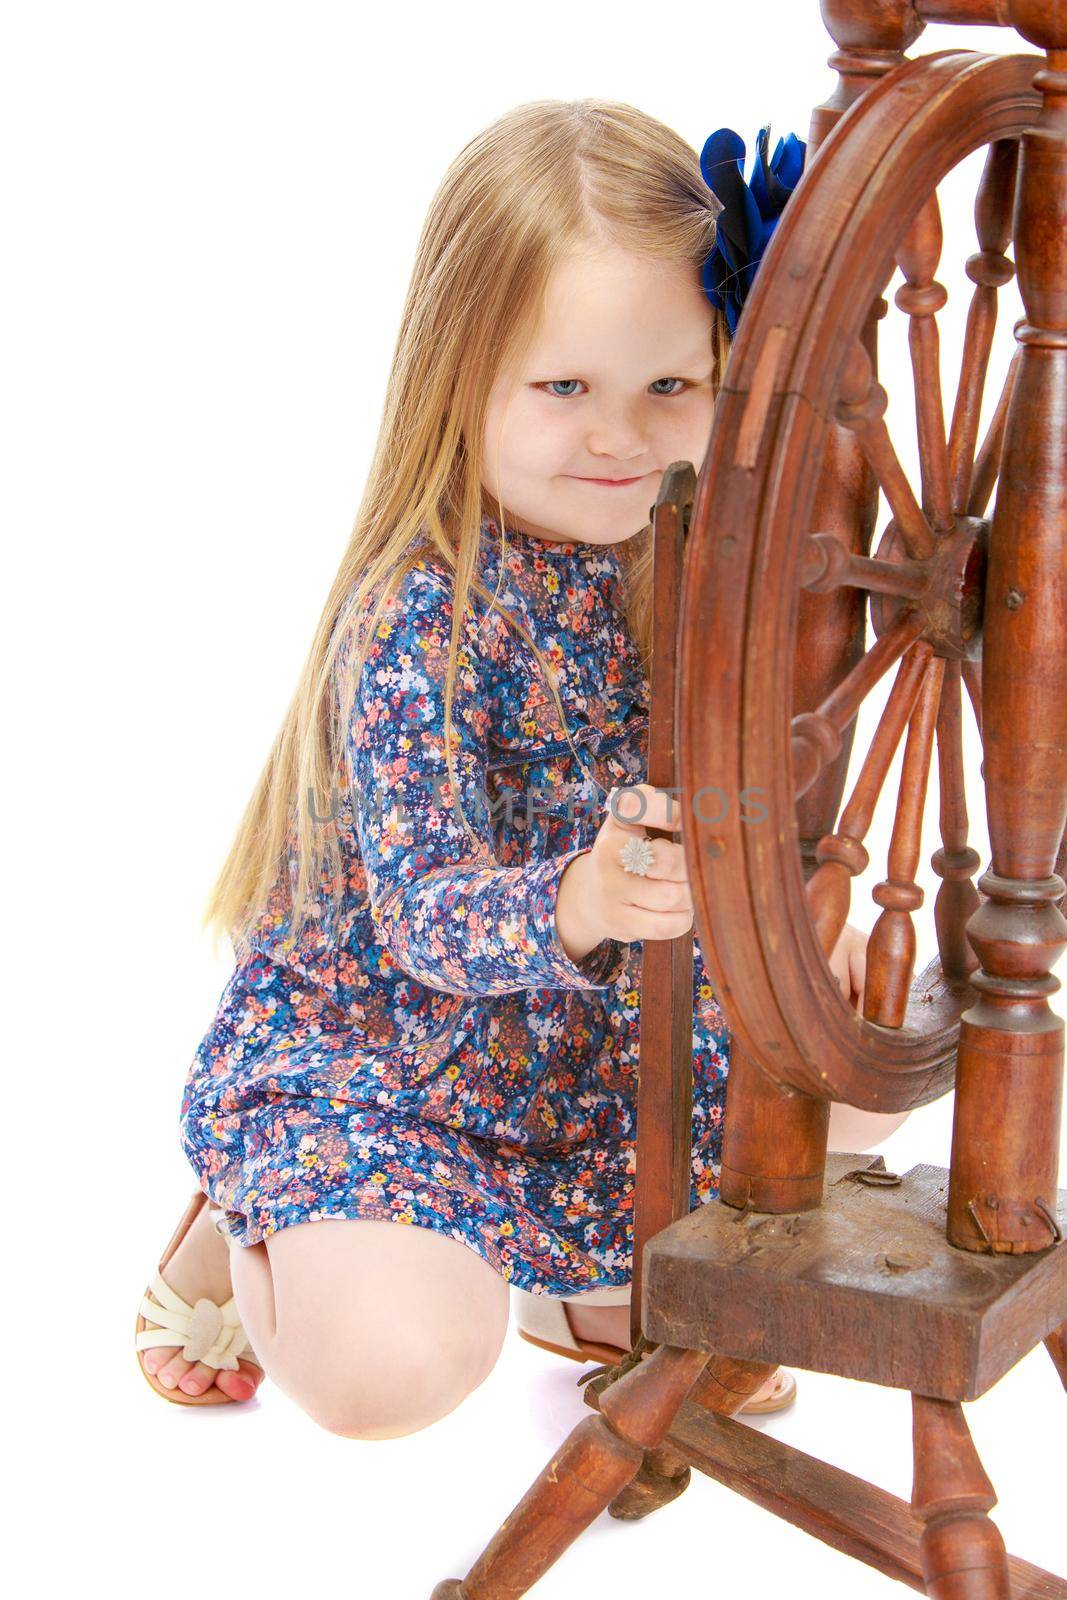 Curious little girl with long blond hair below the shoulders,which are attached to a large blue flower . The girl enthusiastically looking at the old spinning wheel - Isolated on white background